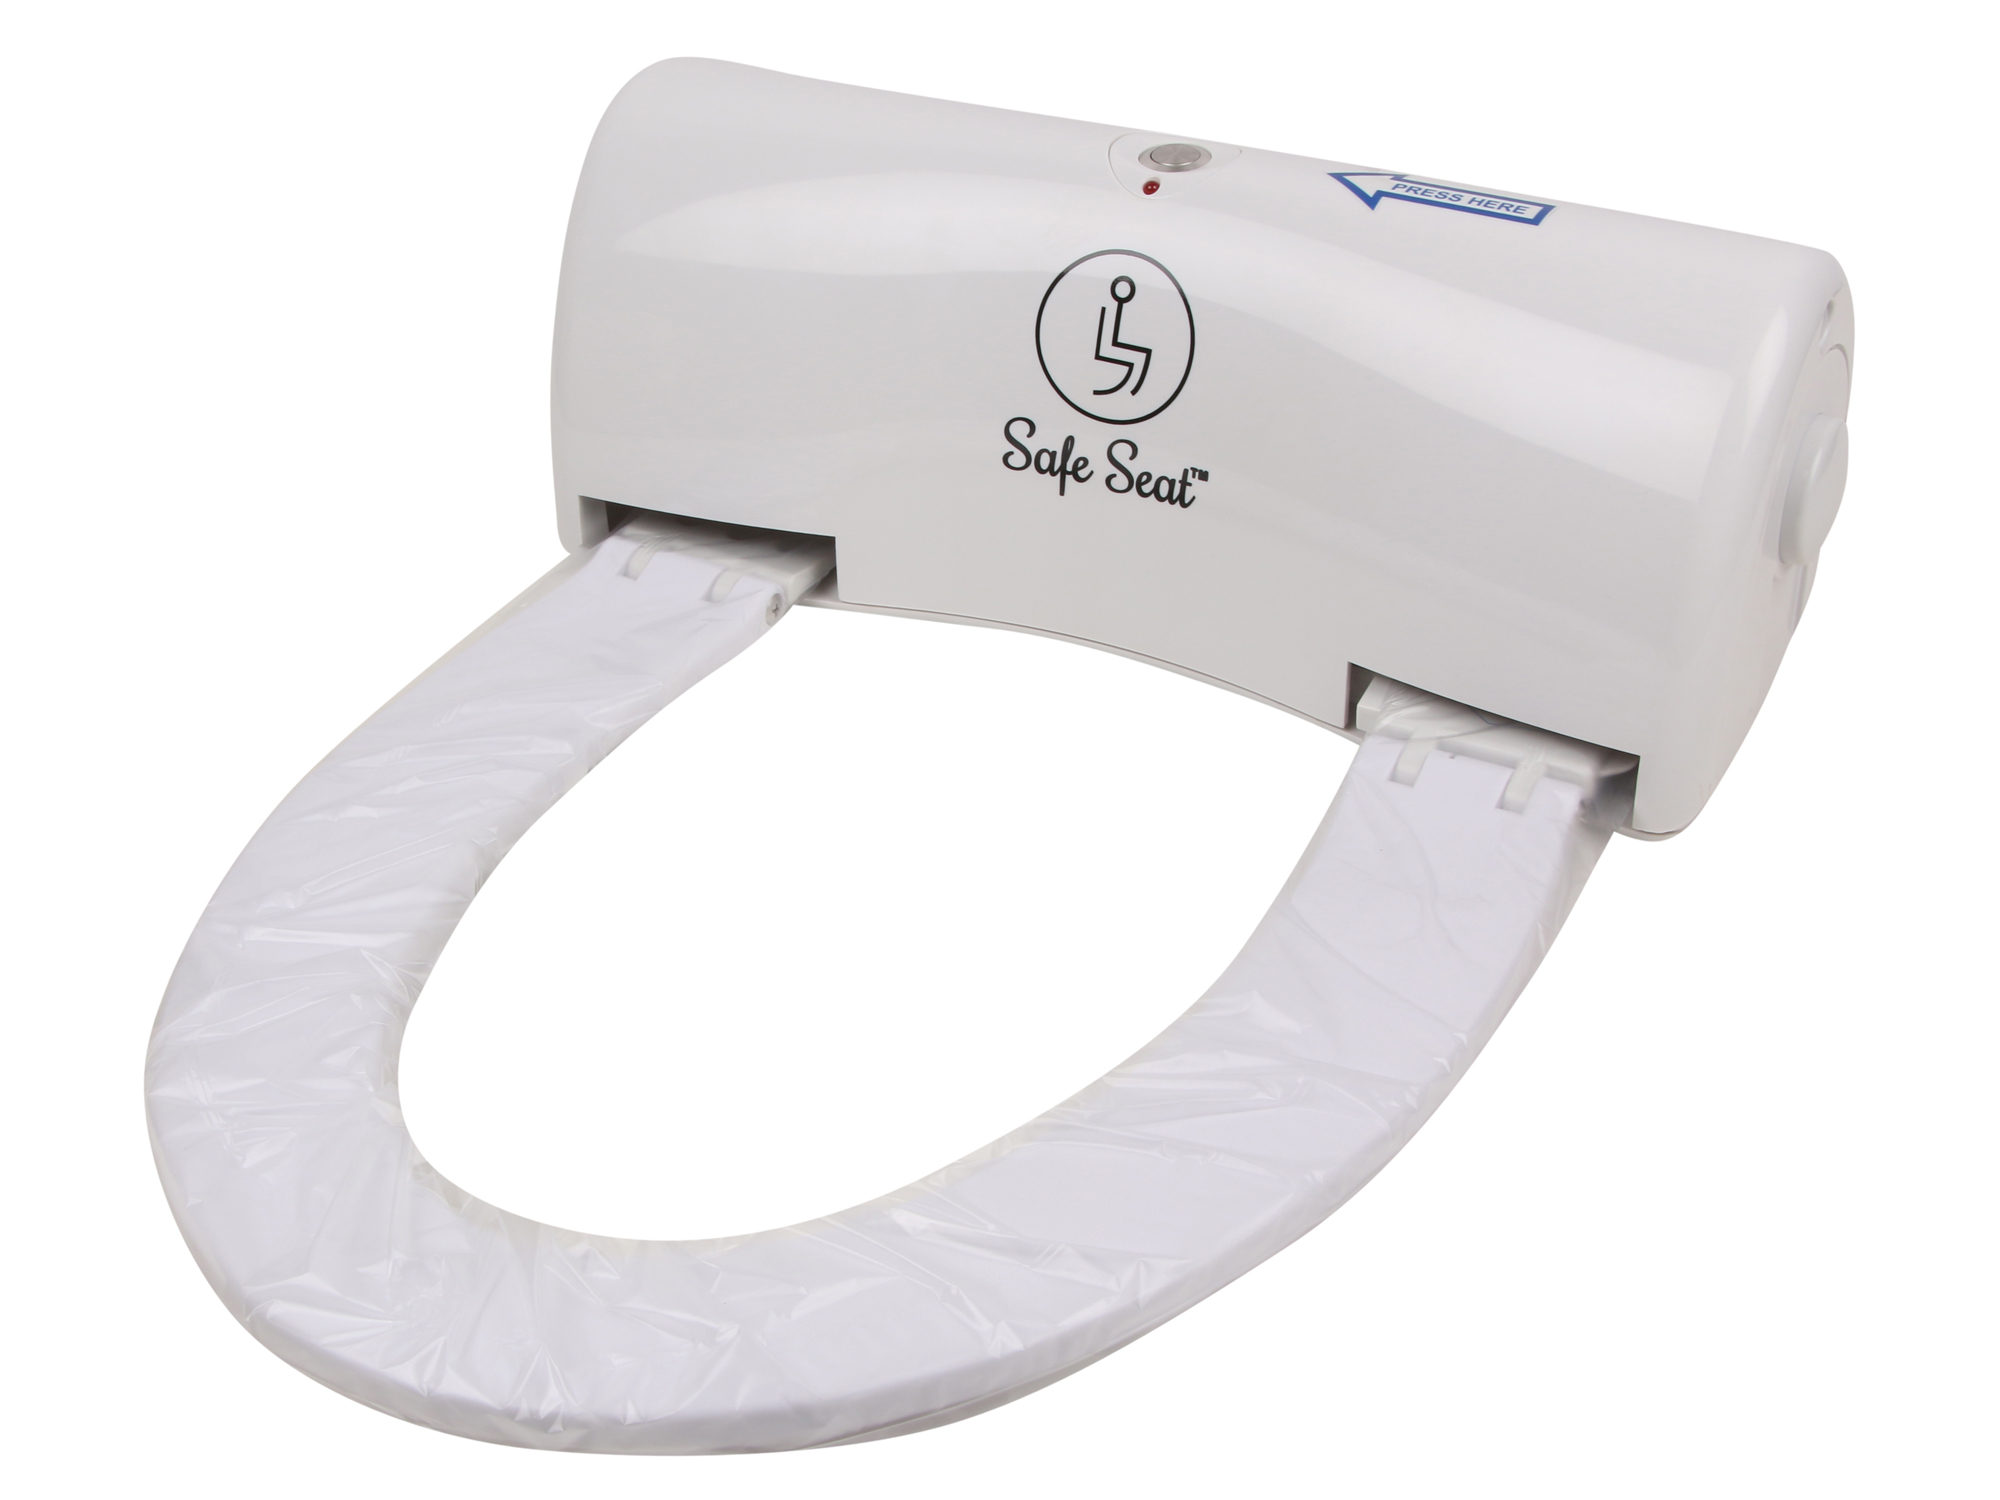 The sanitary roll on the toilet seat. (Source: Safe Seat)